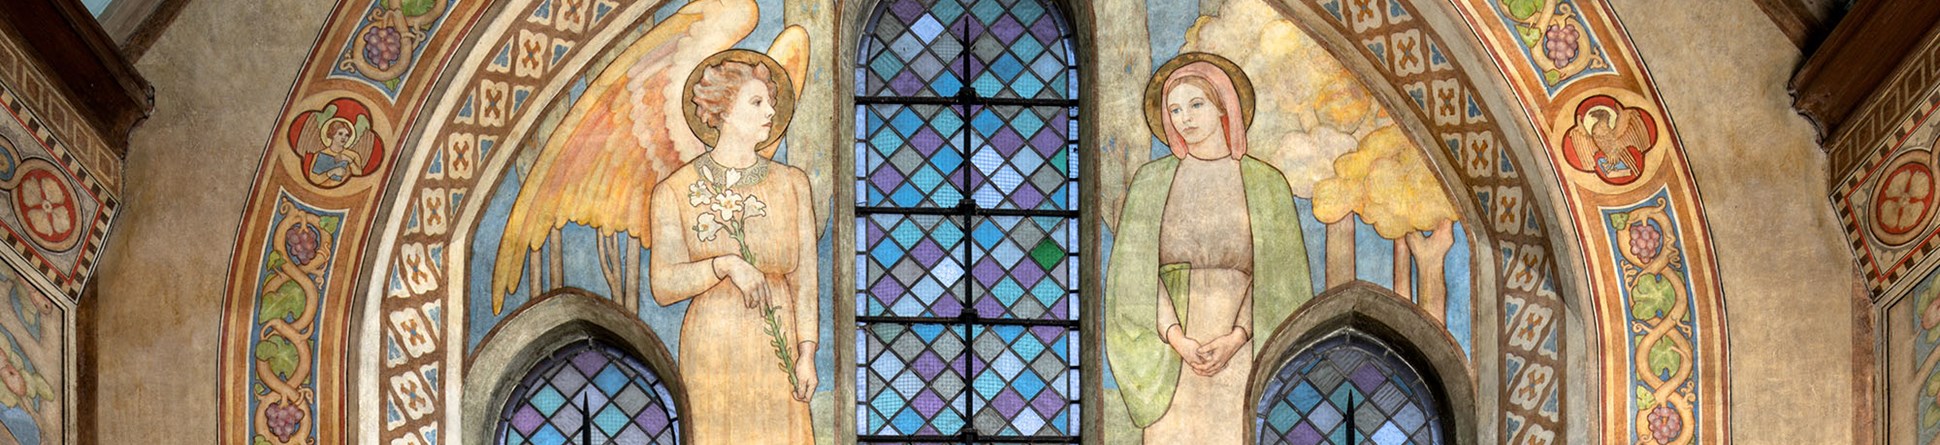 Wall painting of two figures depicting the Annunciation